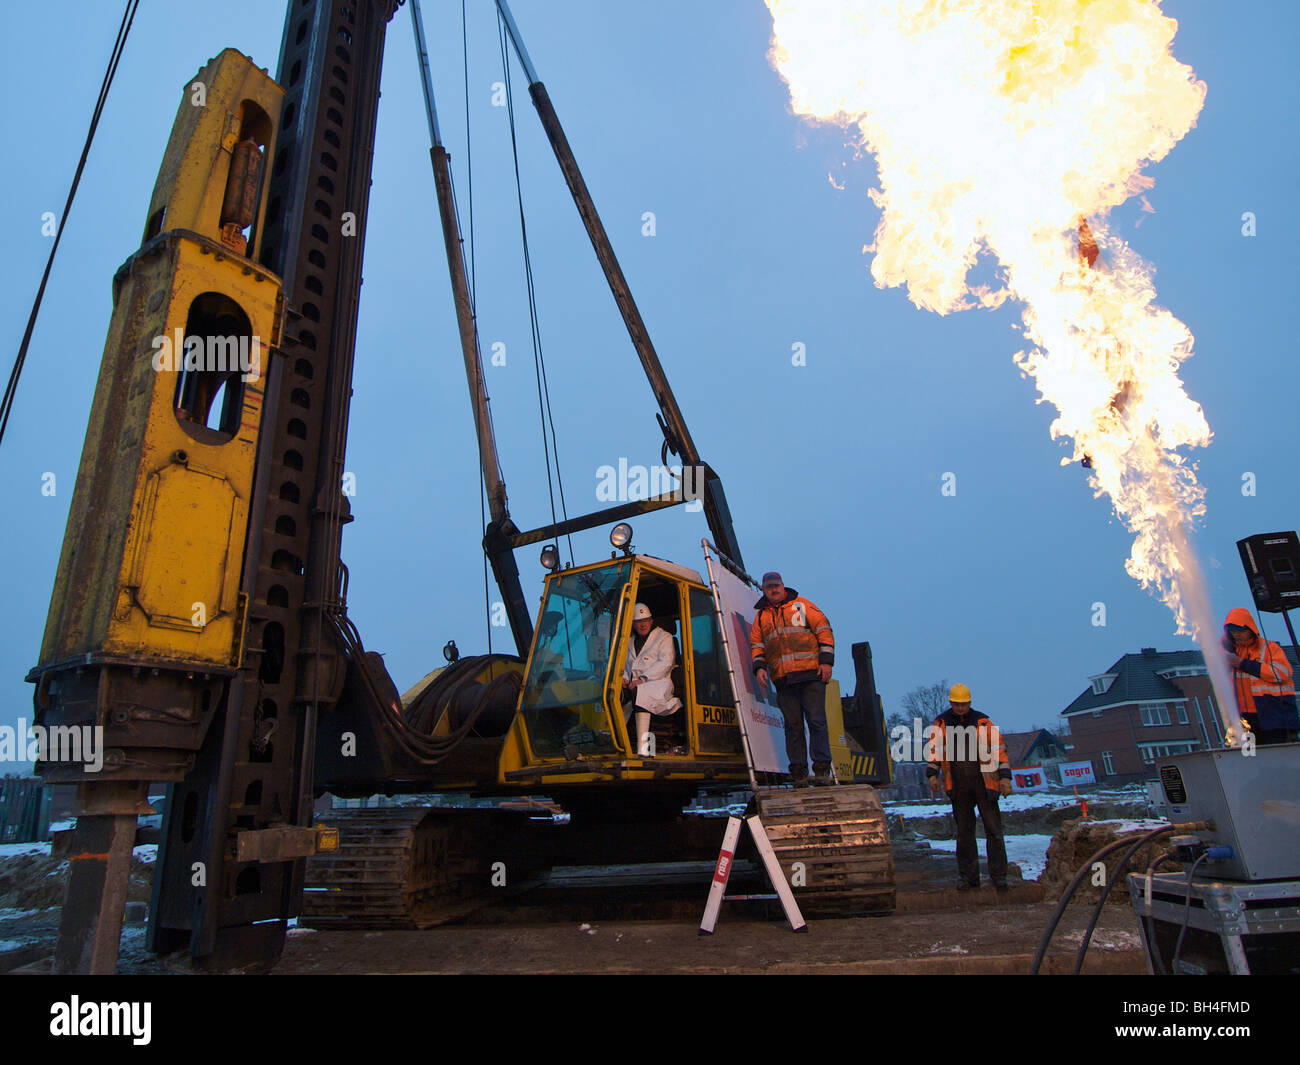 Ceremony at the start of a new building project, first pole being driven into the ground, large flame shooting up in the sky. Stock Photo